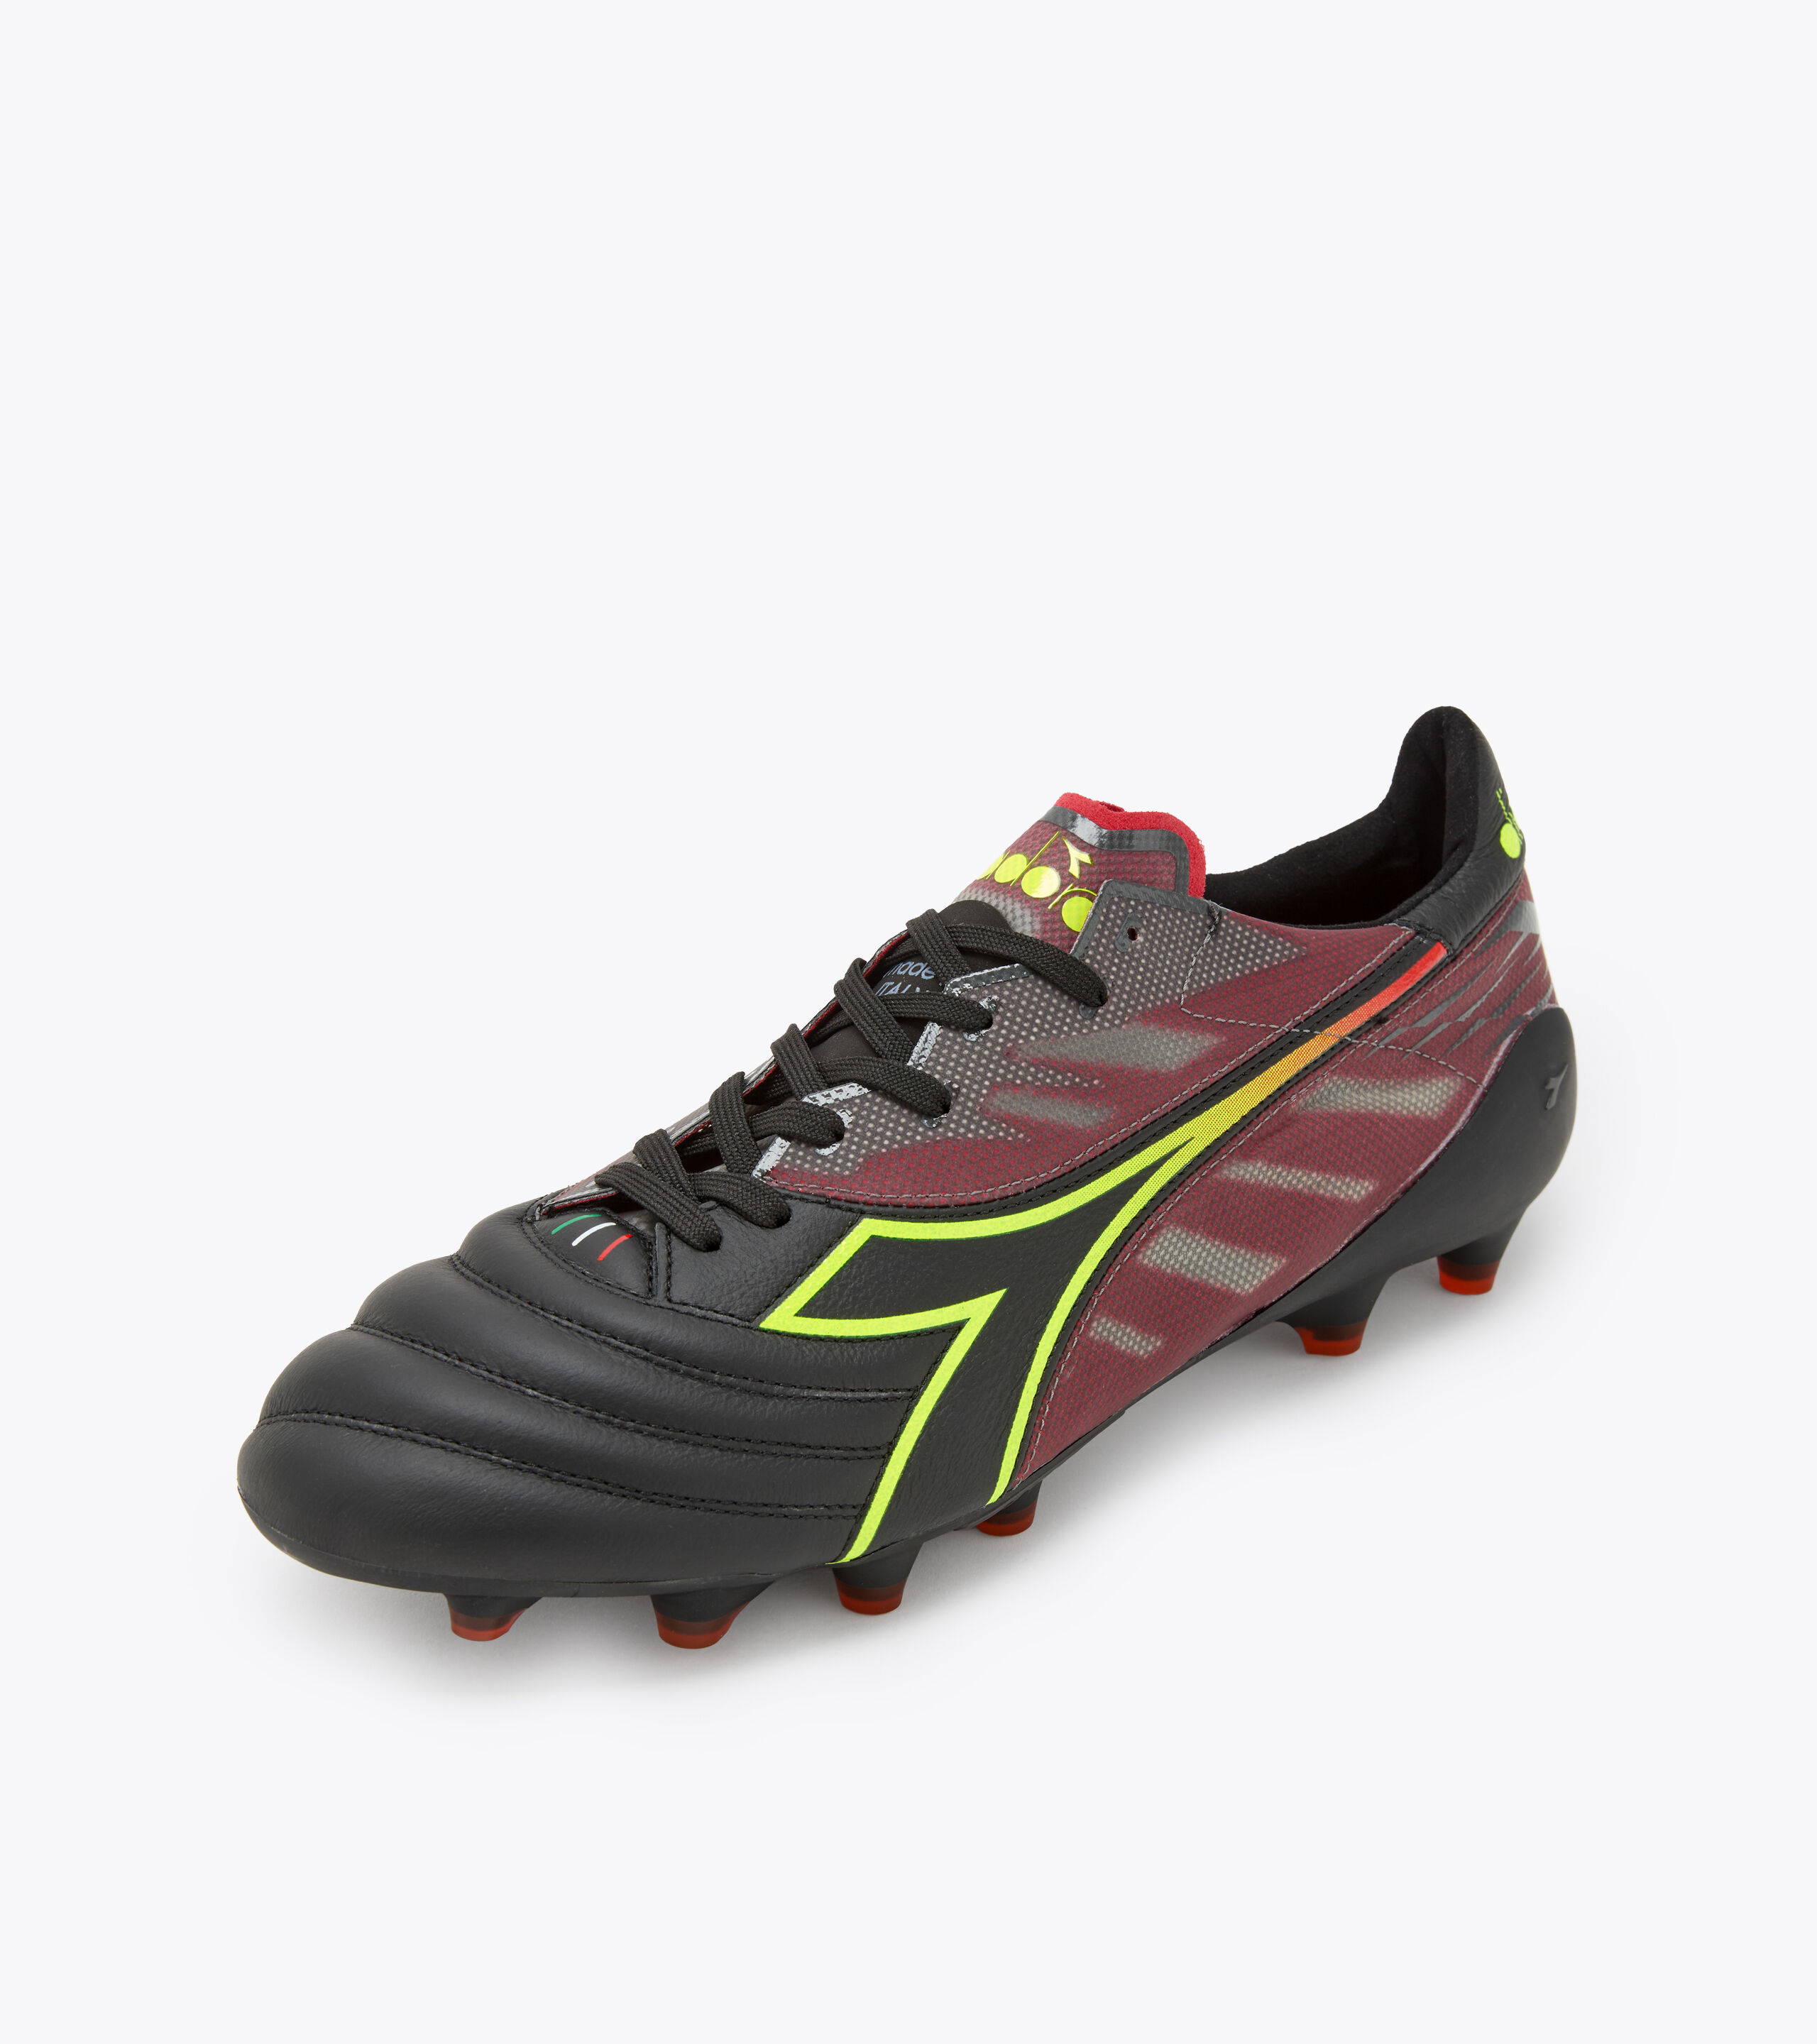 BRASIL ELITE VELOCE ITA LPX Firm ground football boots - Made in